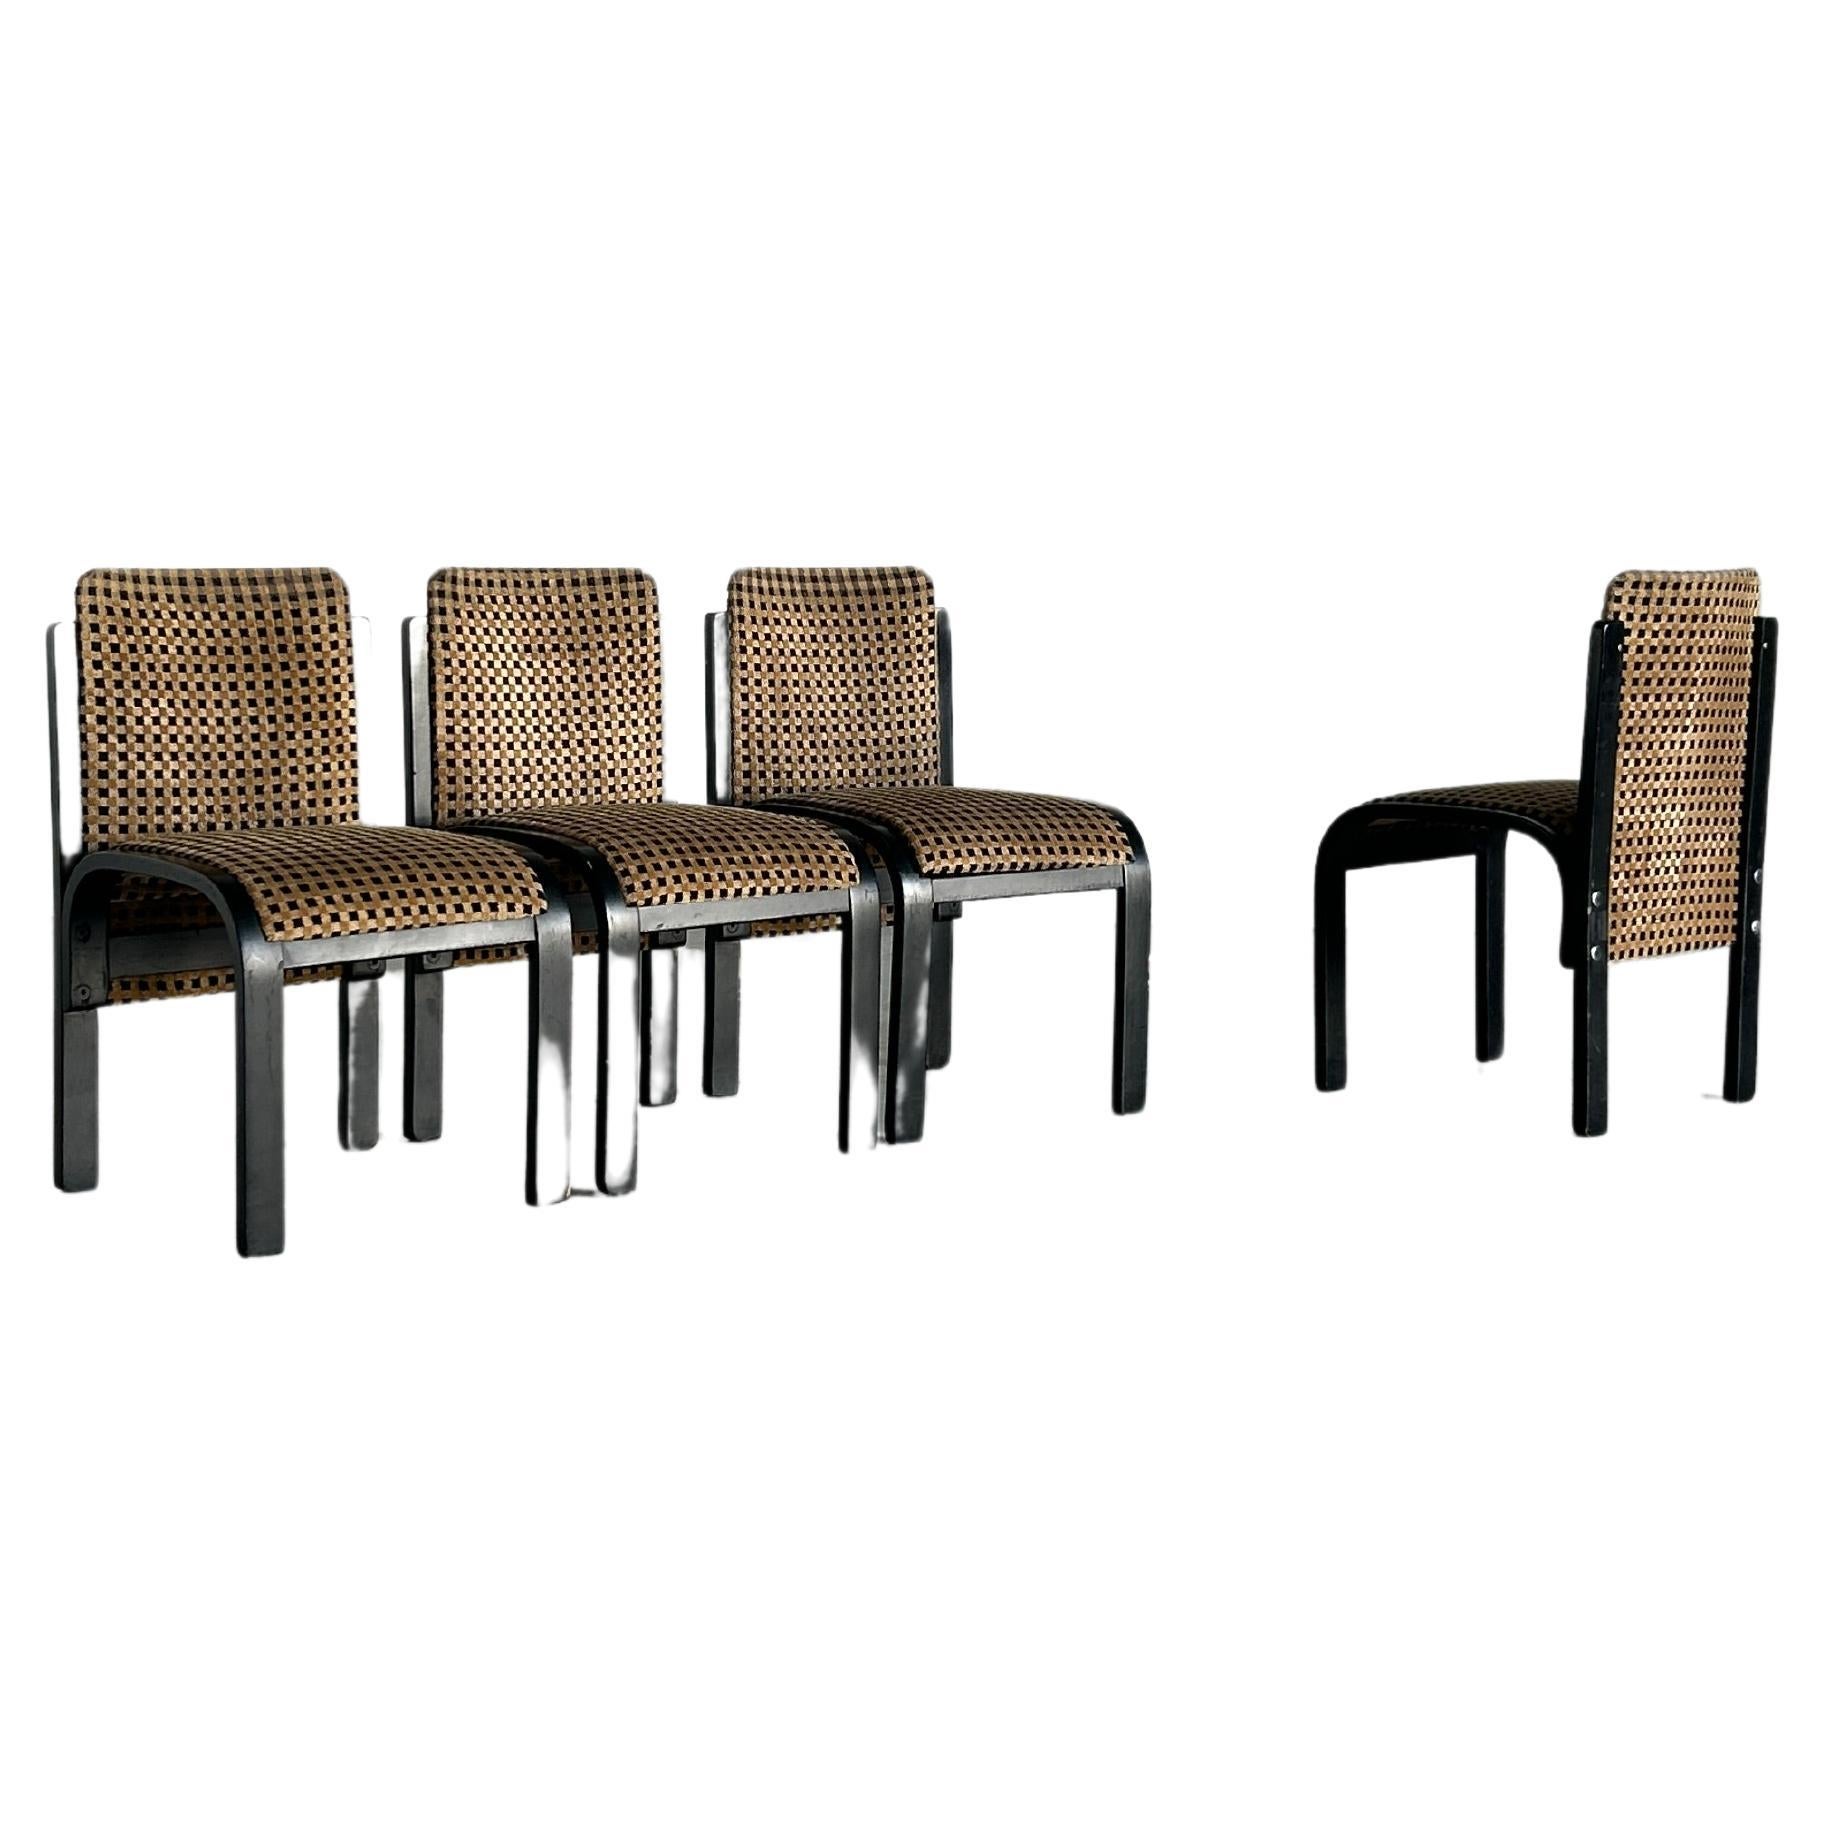 Set of 4 Italian Sculptural Lacquered Bentwood Dining Chairs, Geometric Pattern